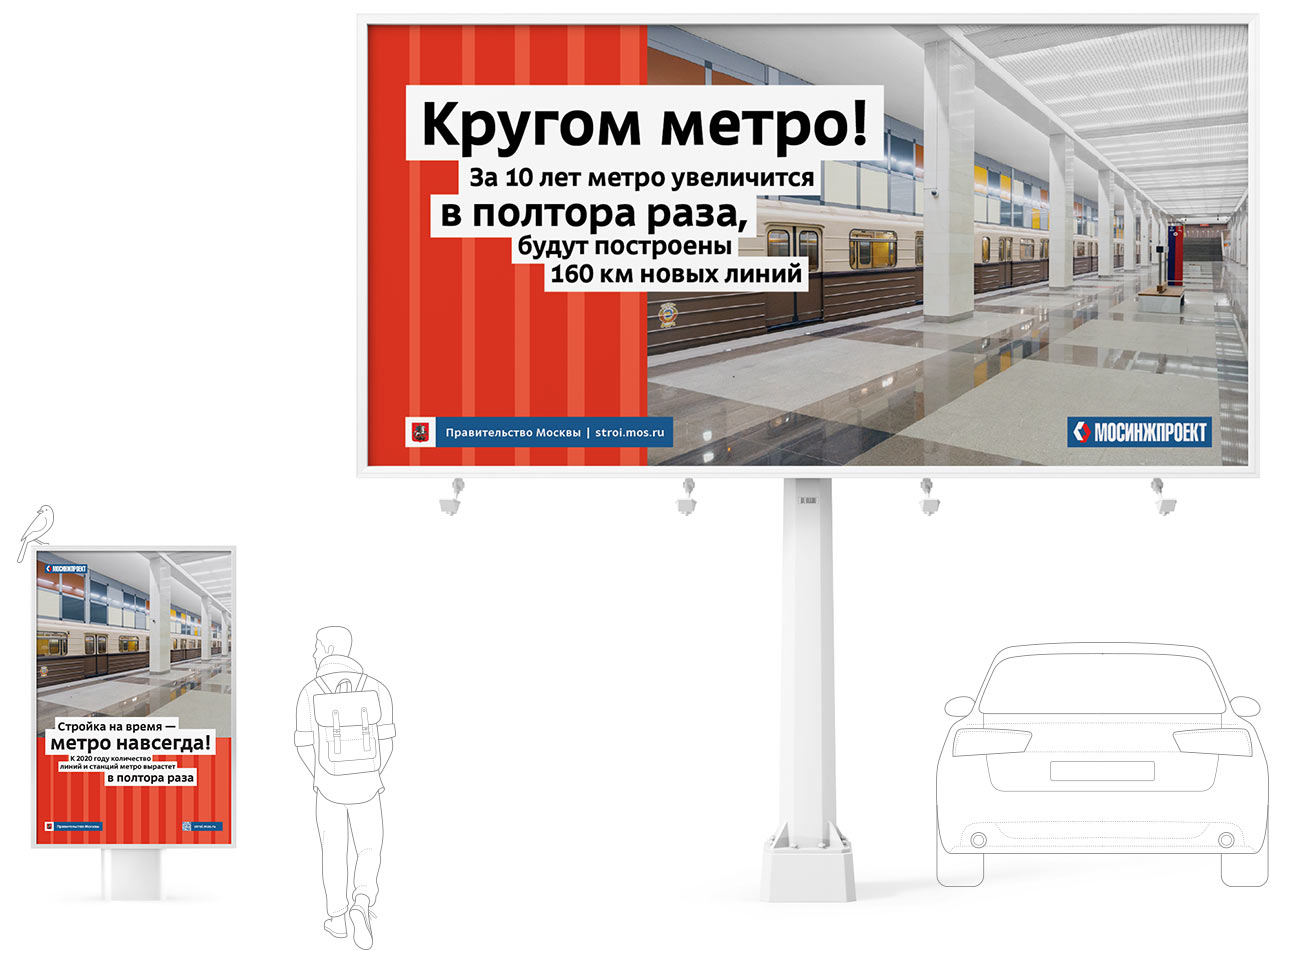 moscow construction2 ads